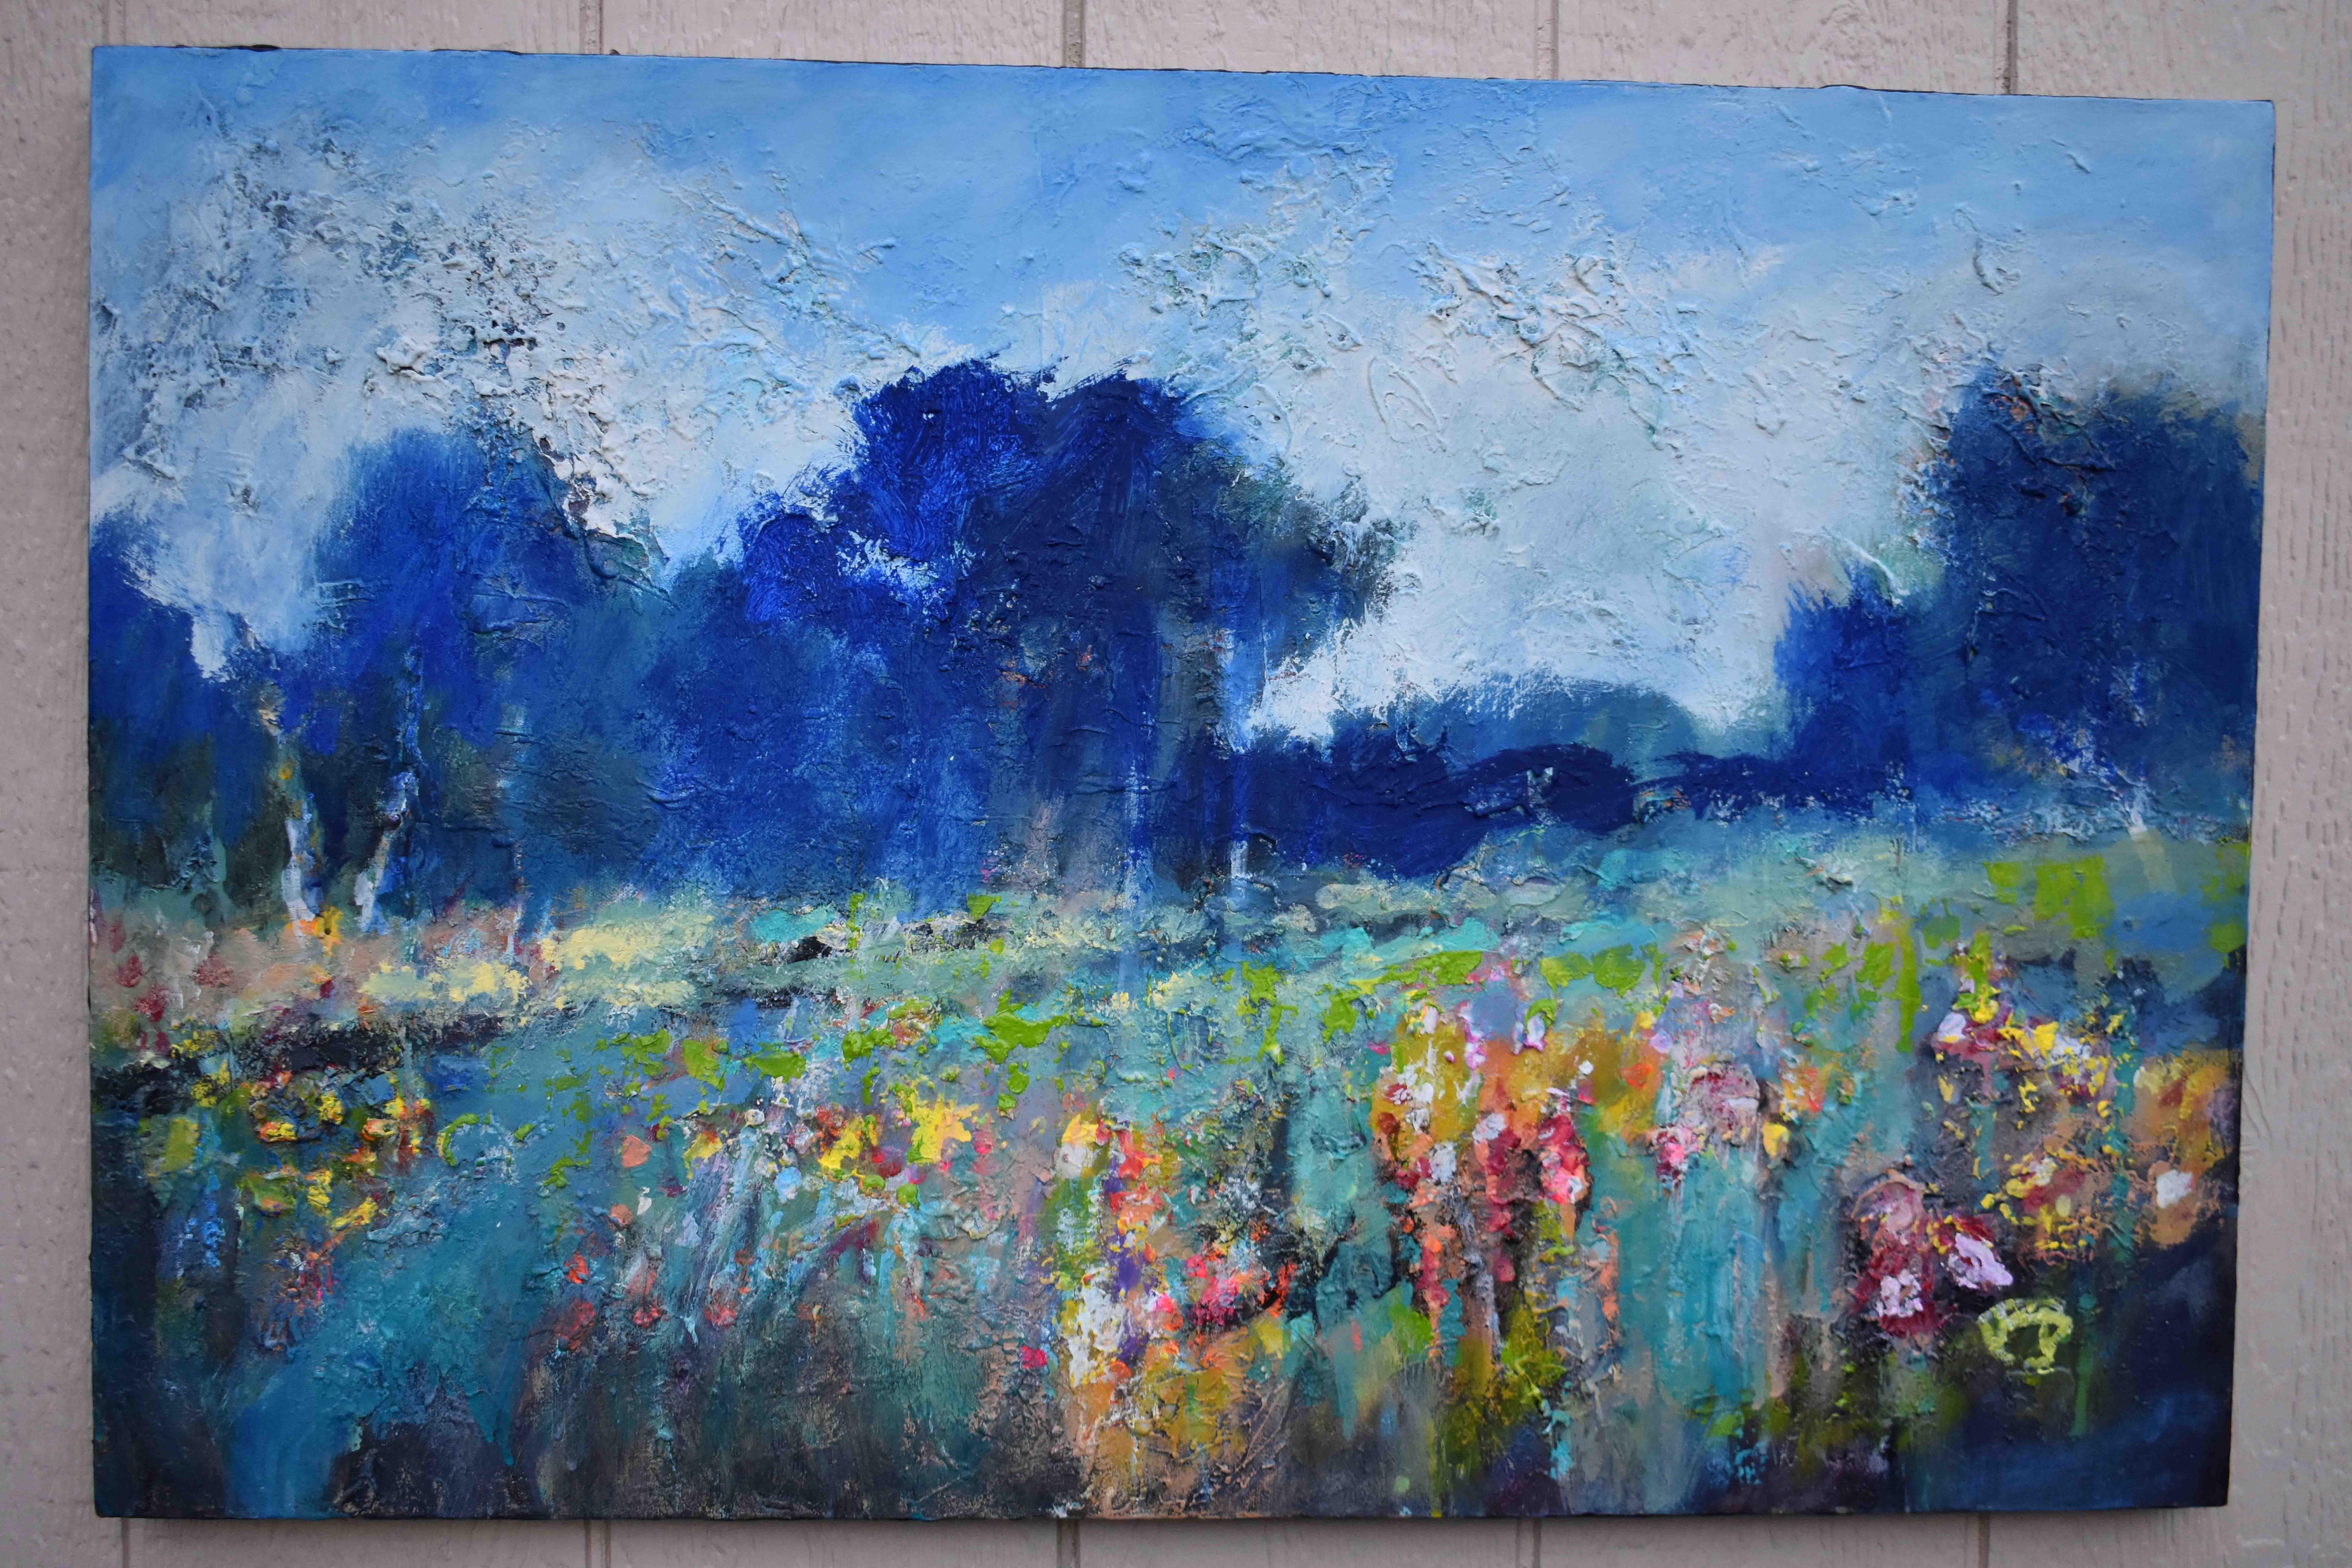 <p>Artist Comments<br>Artist Kip Decker displays a flourishing landscape with an expressionist approach. Colorful wildflowers abundantly grow by the ridge of a hill. He paints the lively piece in strikingly dramatic impasto. Kip captures the feeling